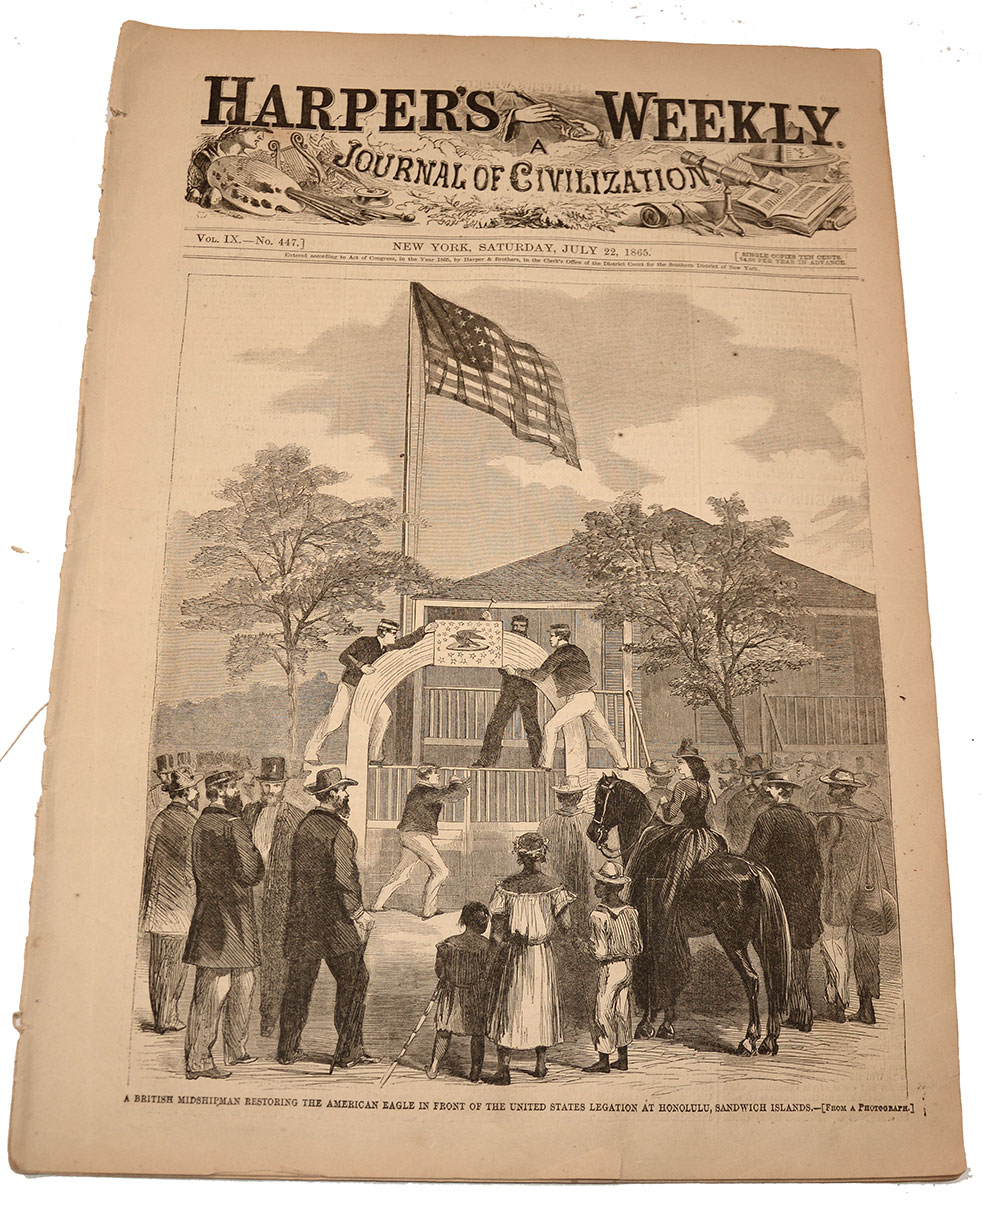 HARPER’S WEEKLY—JULY 22, 1865. [GETTYSBURG MONUMENT CONTENT—LINCOLN CONPIRATORS EXECUTION]. 